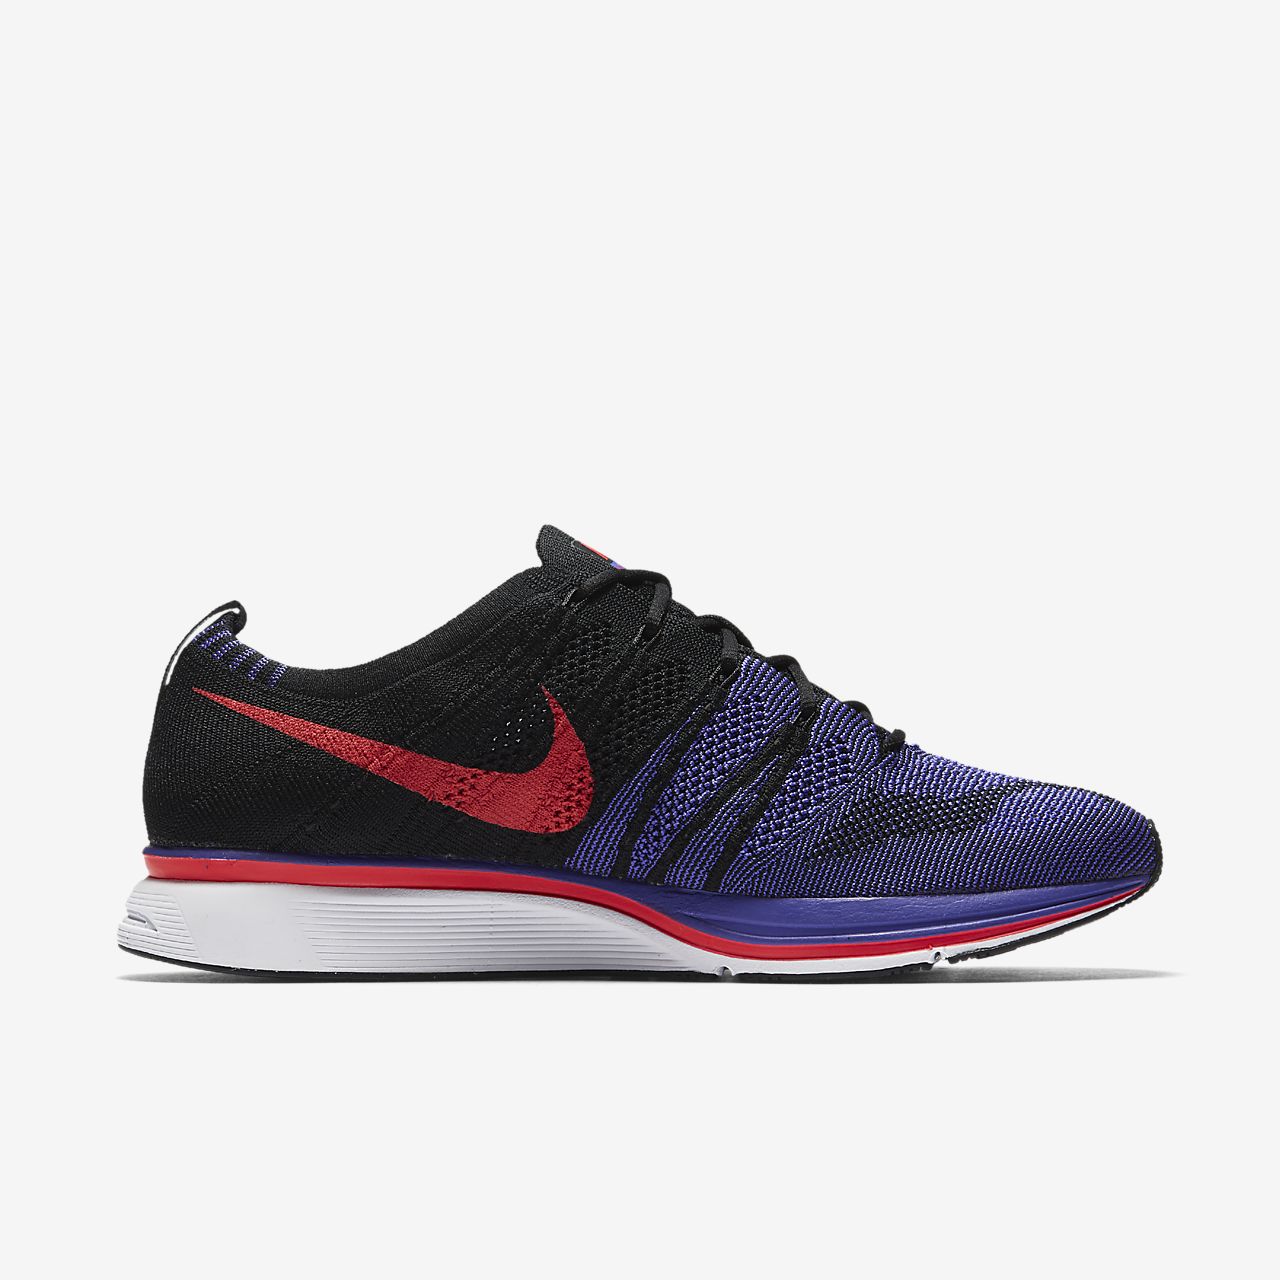 nike flyknit trainer shoes off 55 